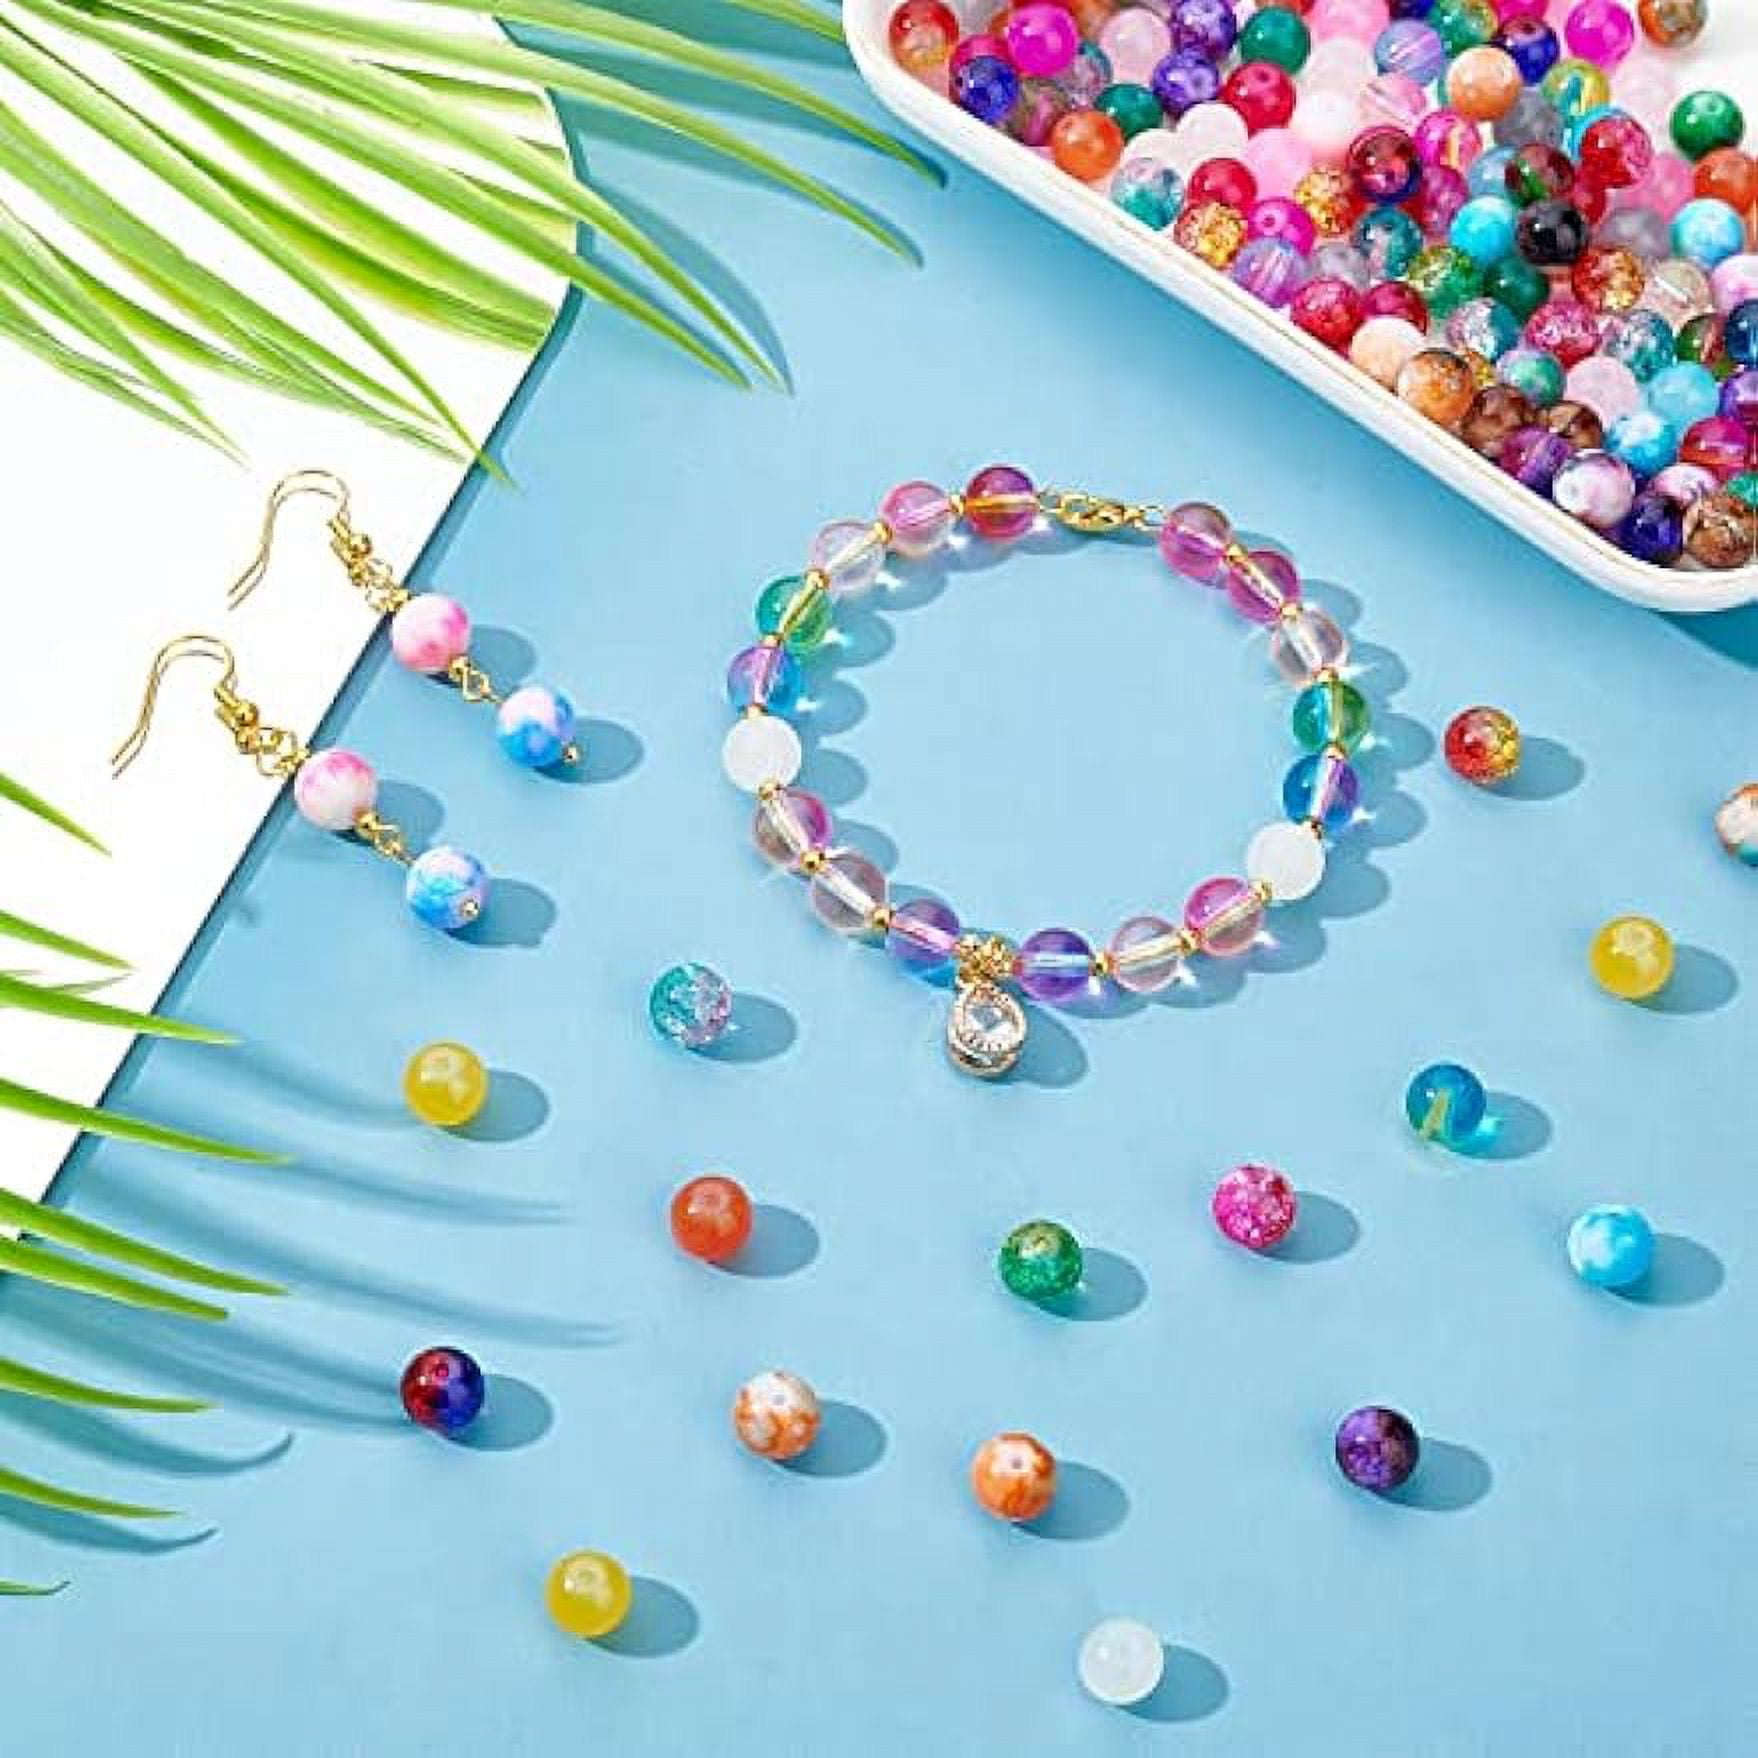 450pcs 8mm Blue Glass Beads 15 Styles Sea Blue Crackle Glass Bead Round  Loose Beads Spacers Craft Glass Beads for Summer Boho Hawaii Bracelets  Necklaces Earring Crafts Jewelry Making 